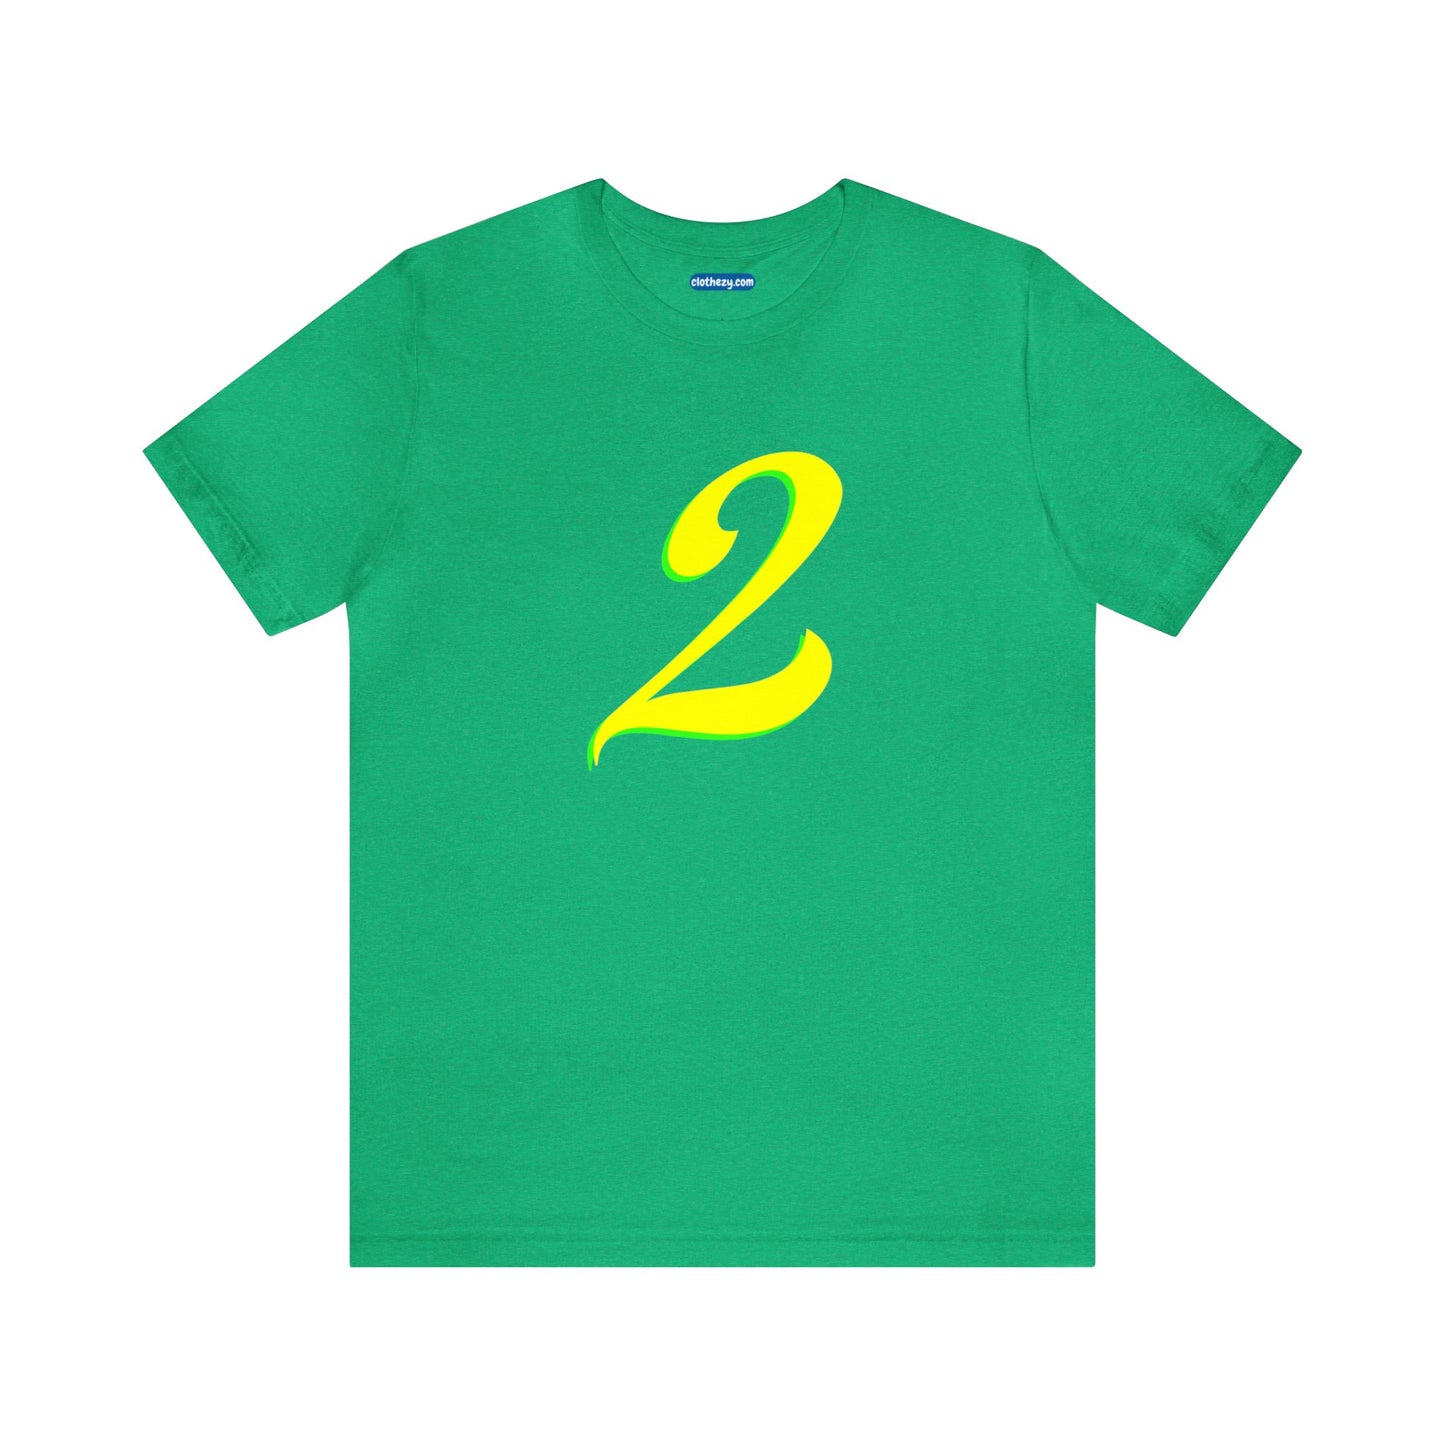 Number 2 Design - Soft Cotton Tee for birthdays and celebrations, Gift for friends and family, Multiple Options by clothezy.com in Royal Blue Heather Size Small - Buy Now